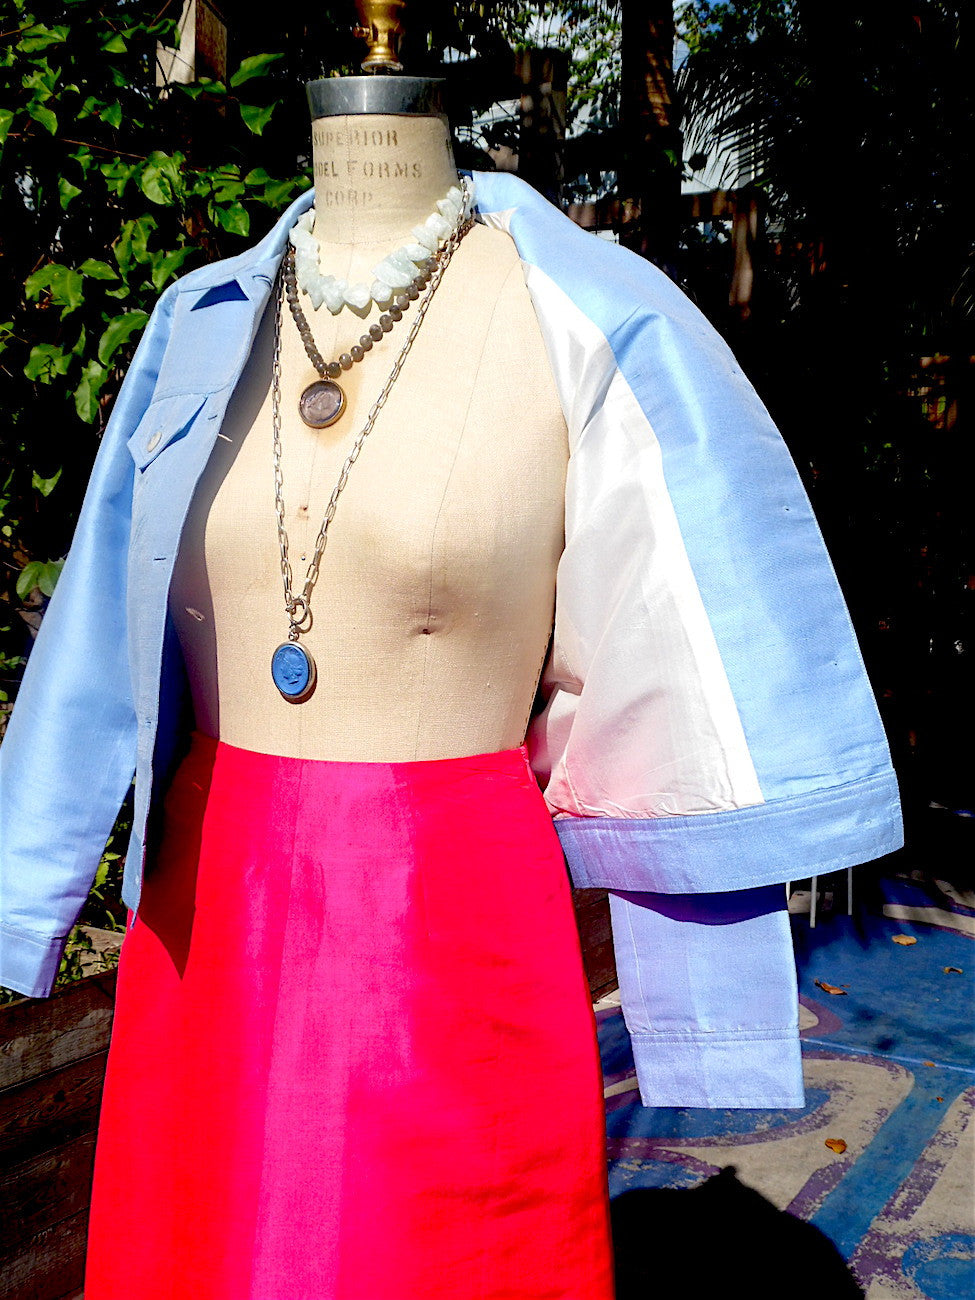 Jean Jacket Thai Silk And Mother Of Pearl Baby Blue Ivory